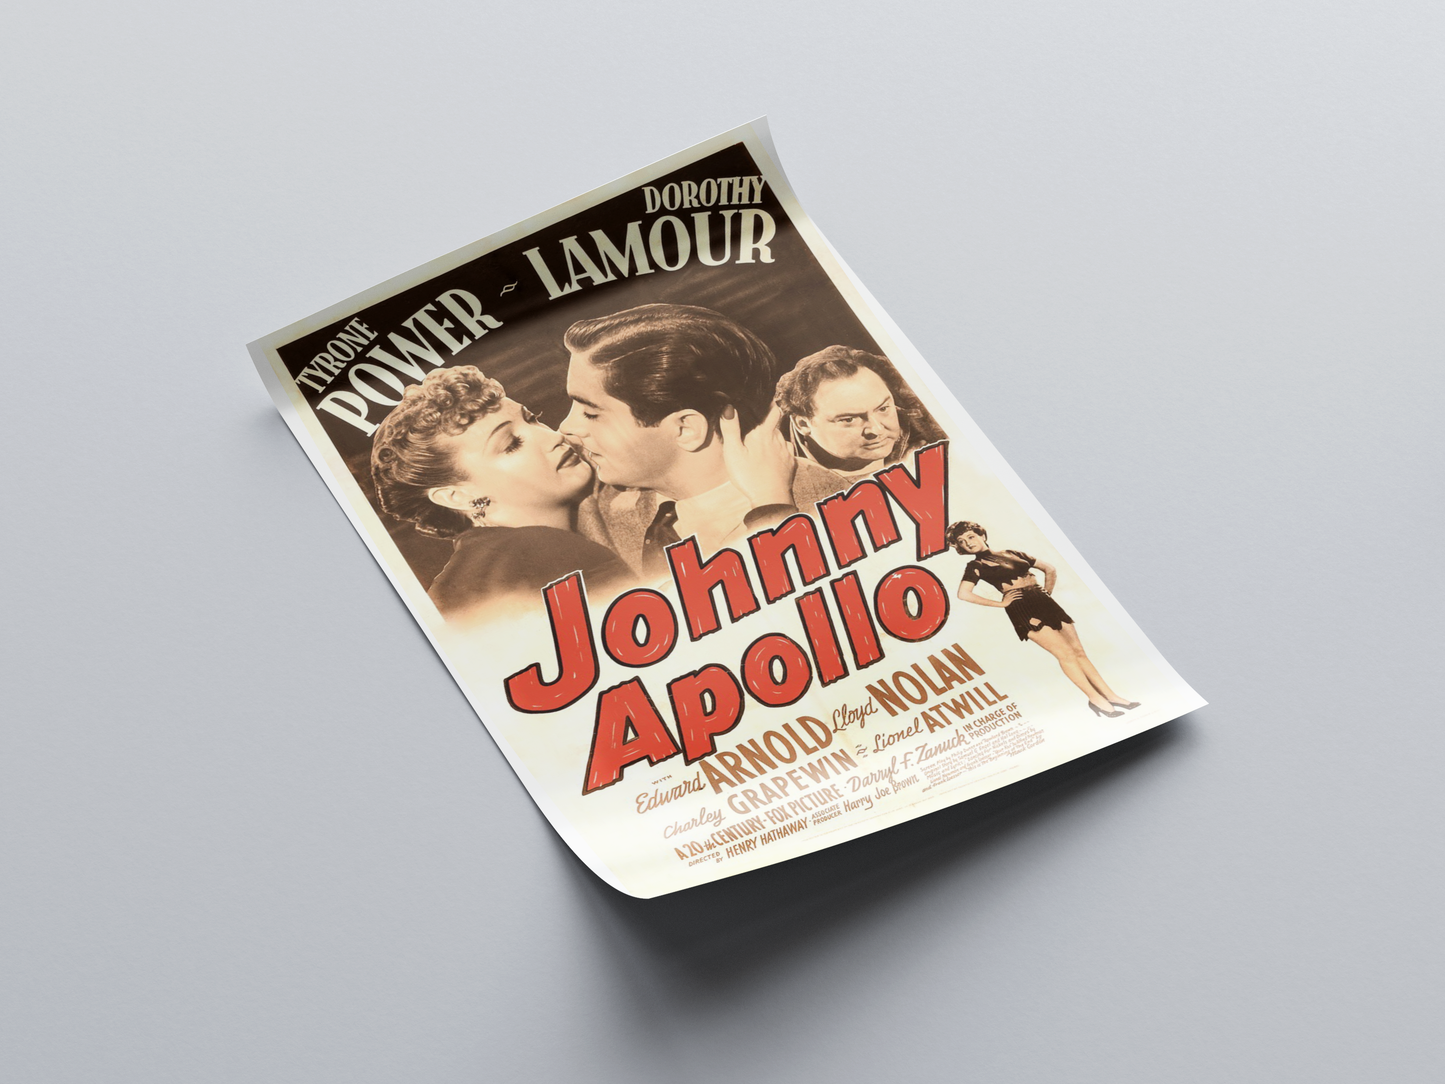 Johnny Apollo (1940) Movie Poster displayed in interior setting